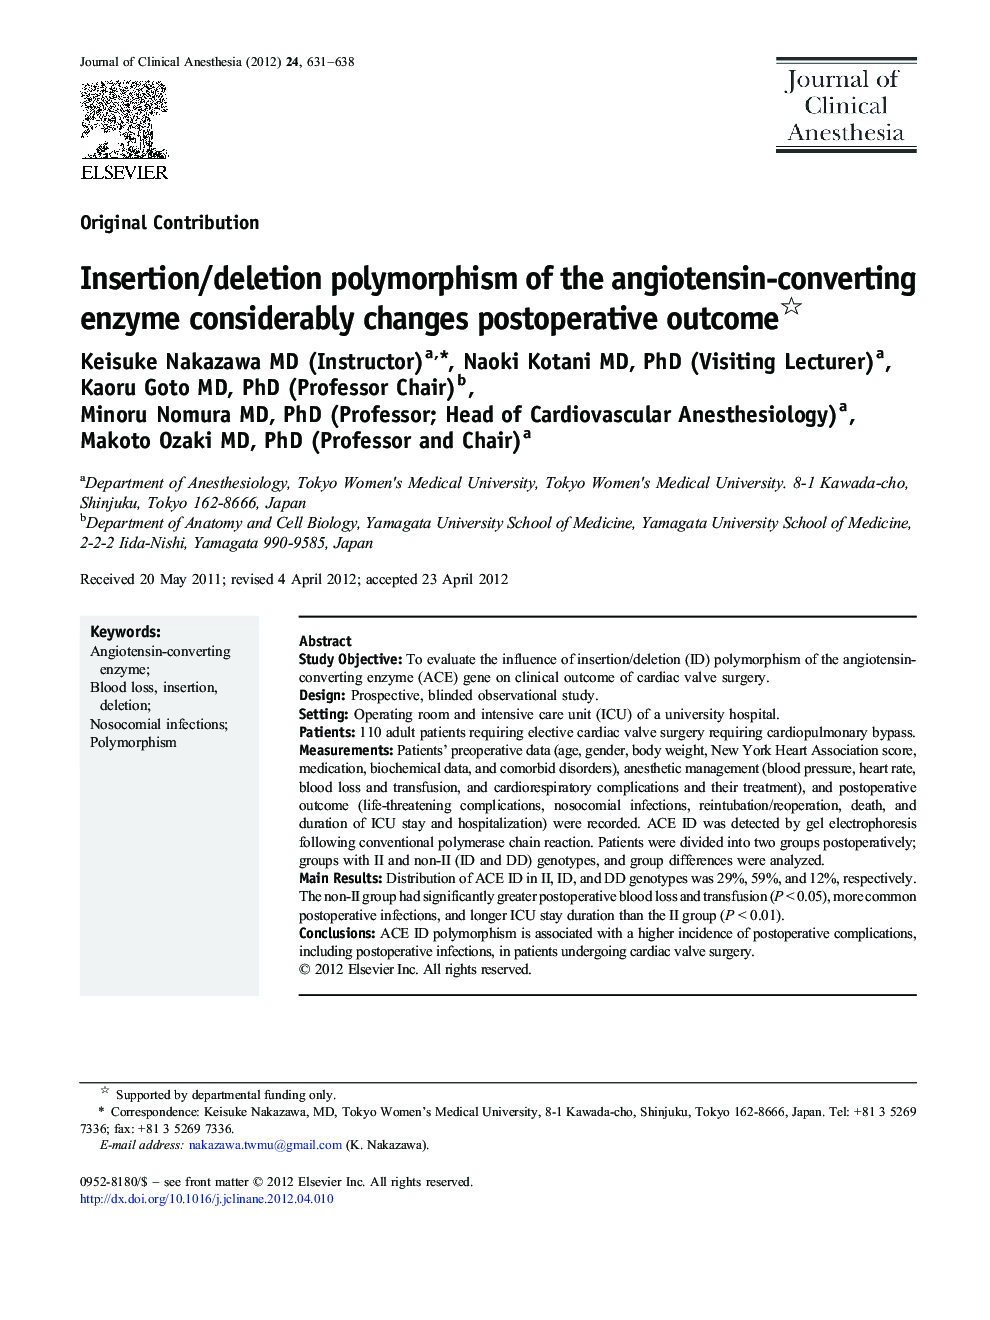 Insertion/deletion polymorphism of the angiotensin-converting enzyme considerably changes postoperative outcome 